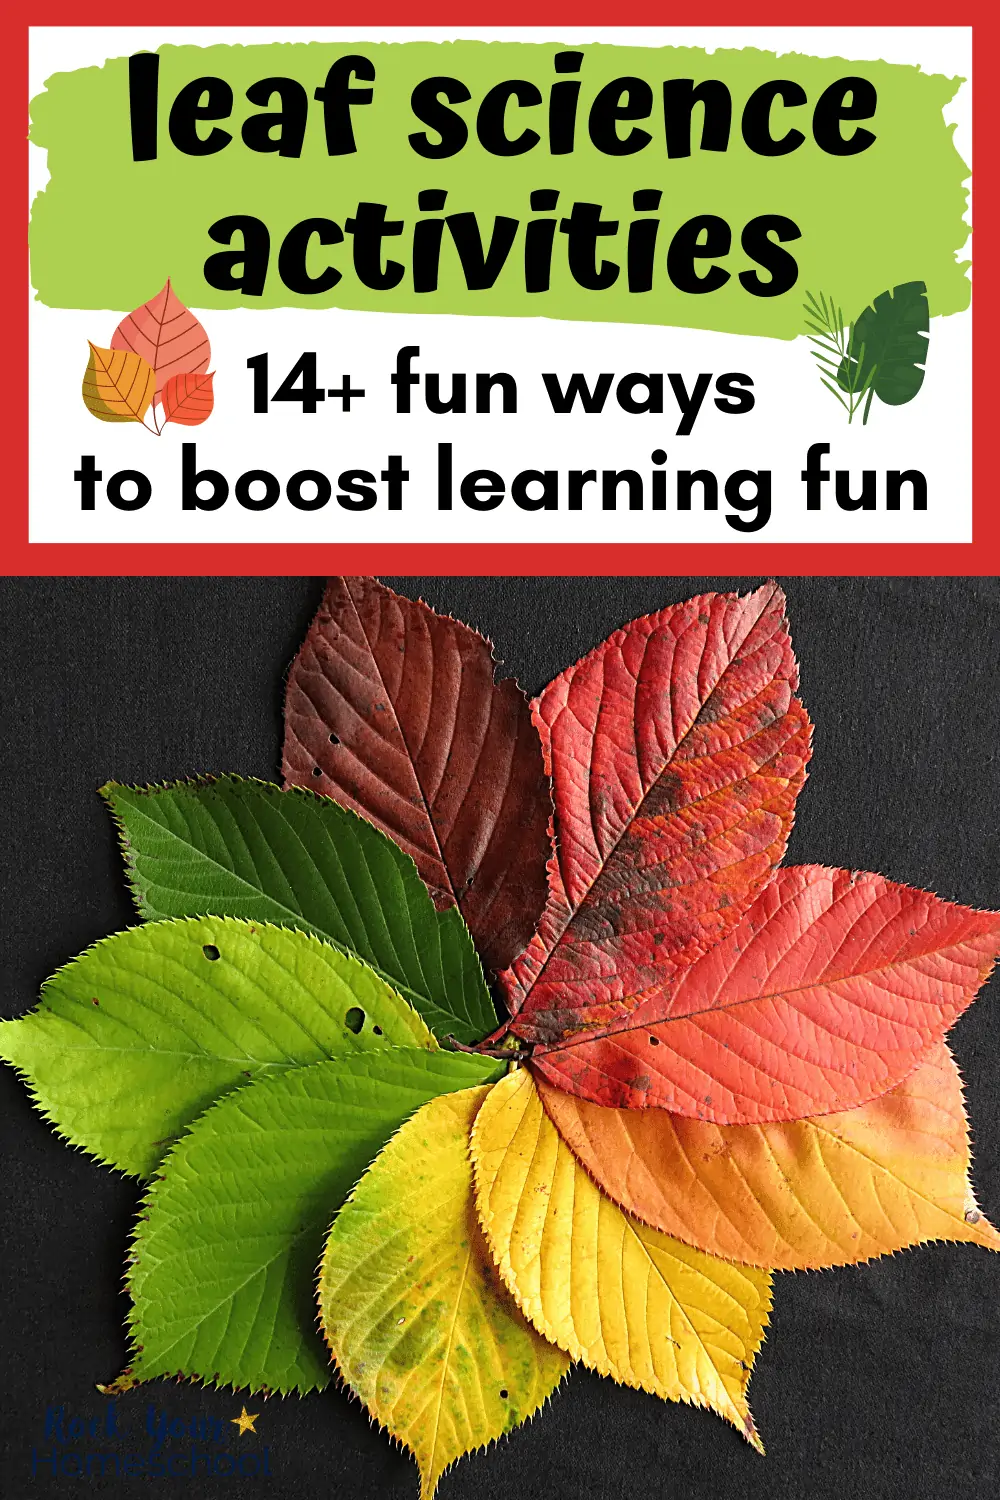 Leaf Science Activities: 14+ Simple Ways to Make It Fun for Your Kids